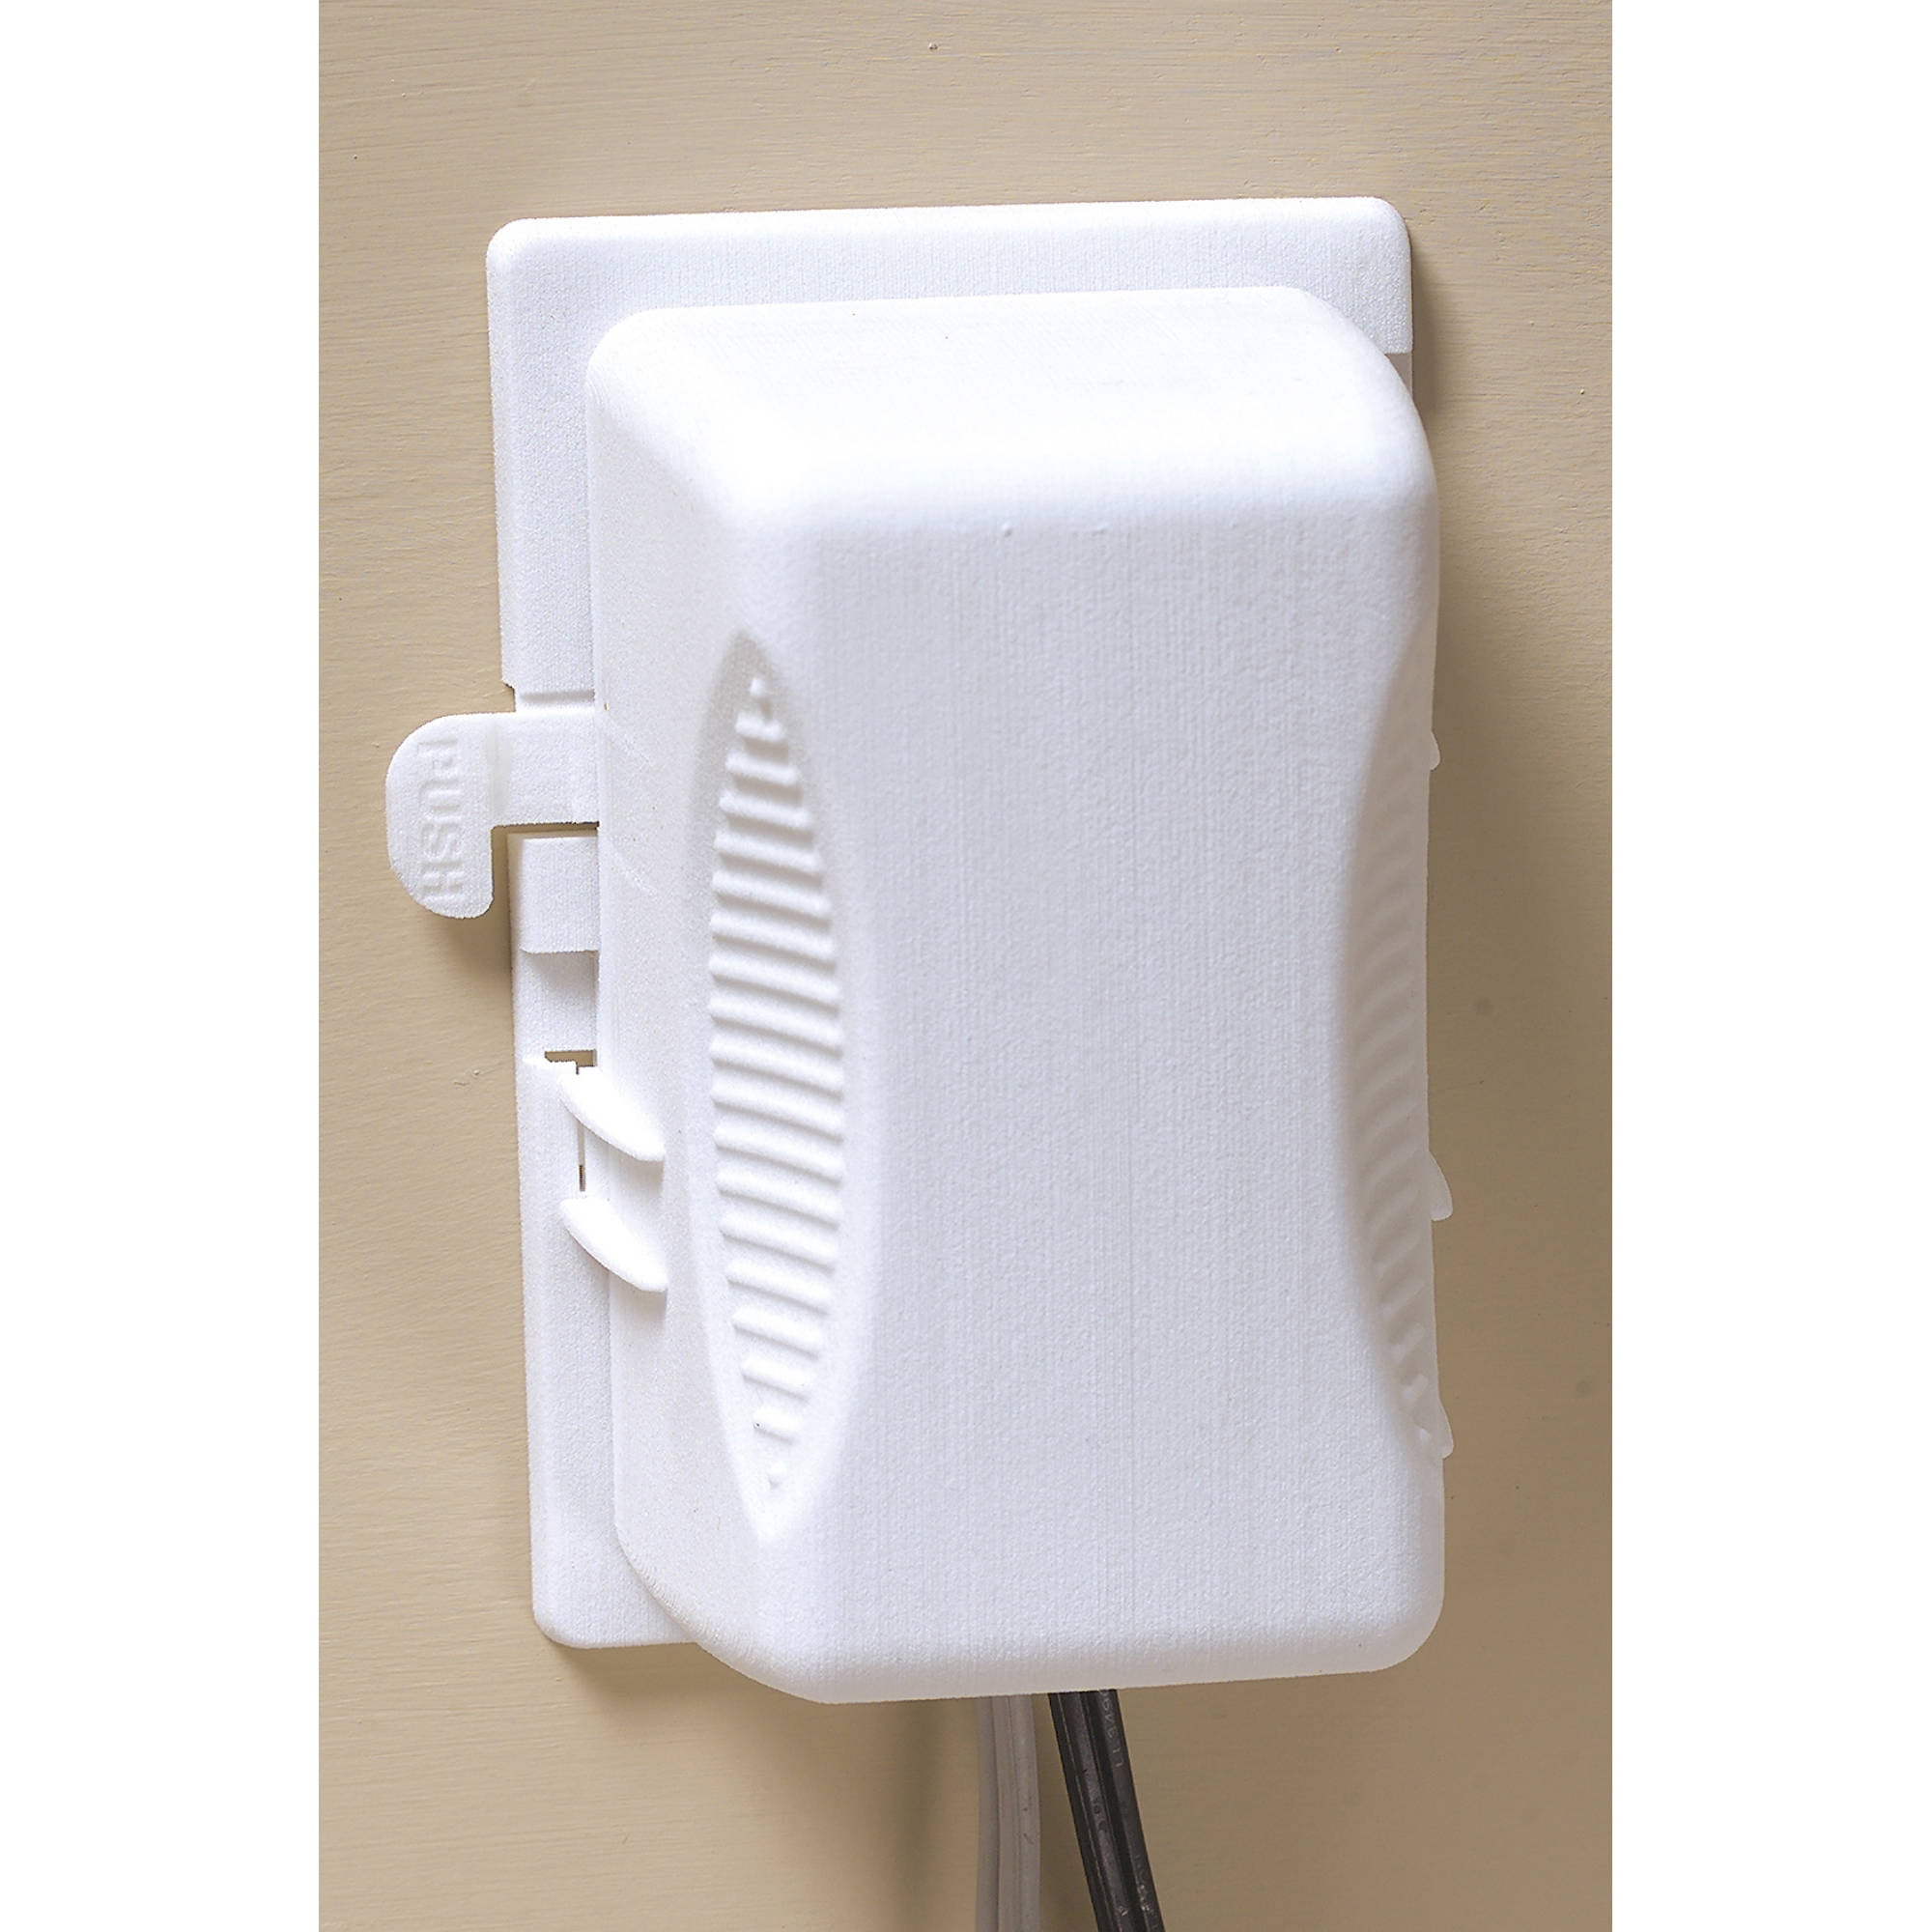 Power Socket Plug Safety Protective Cover For Baby Safety Protector CB 